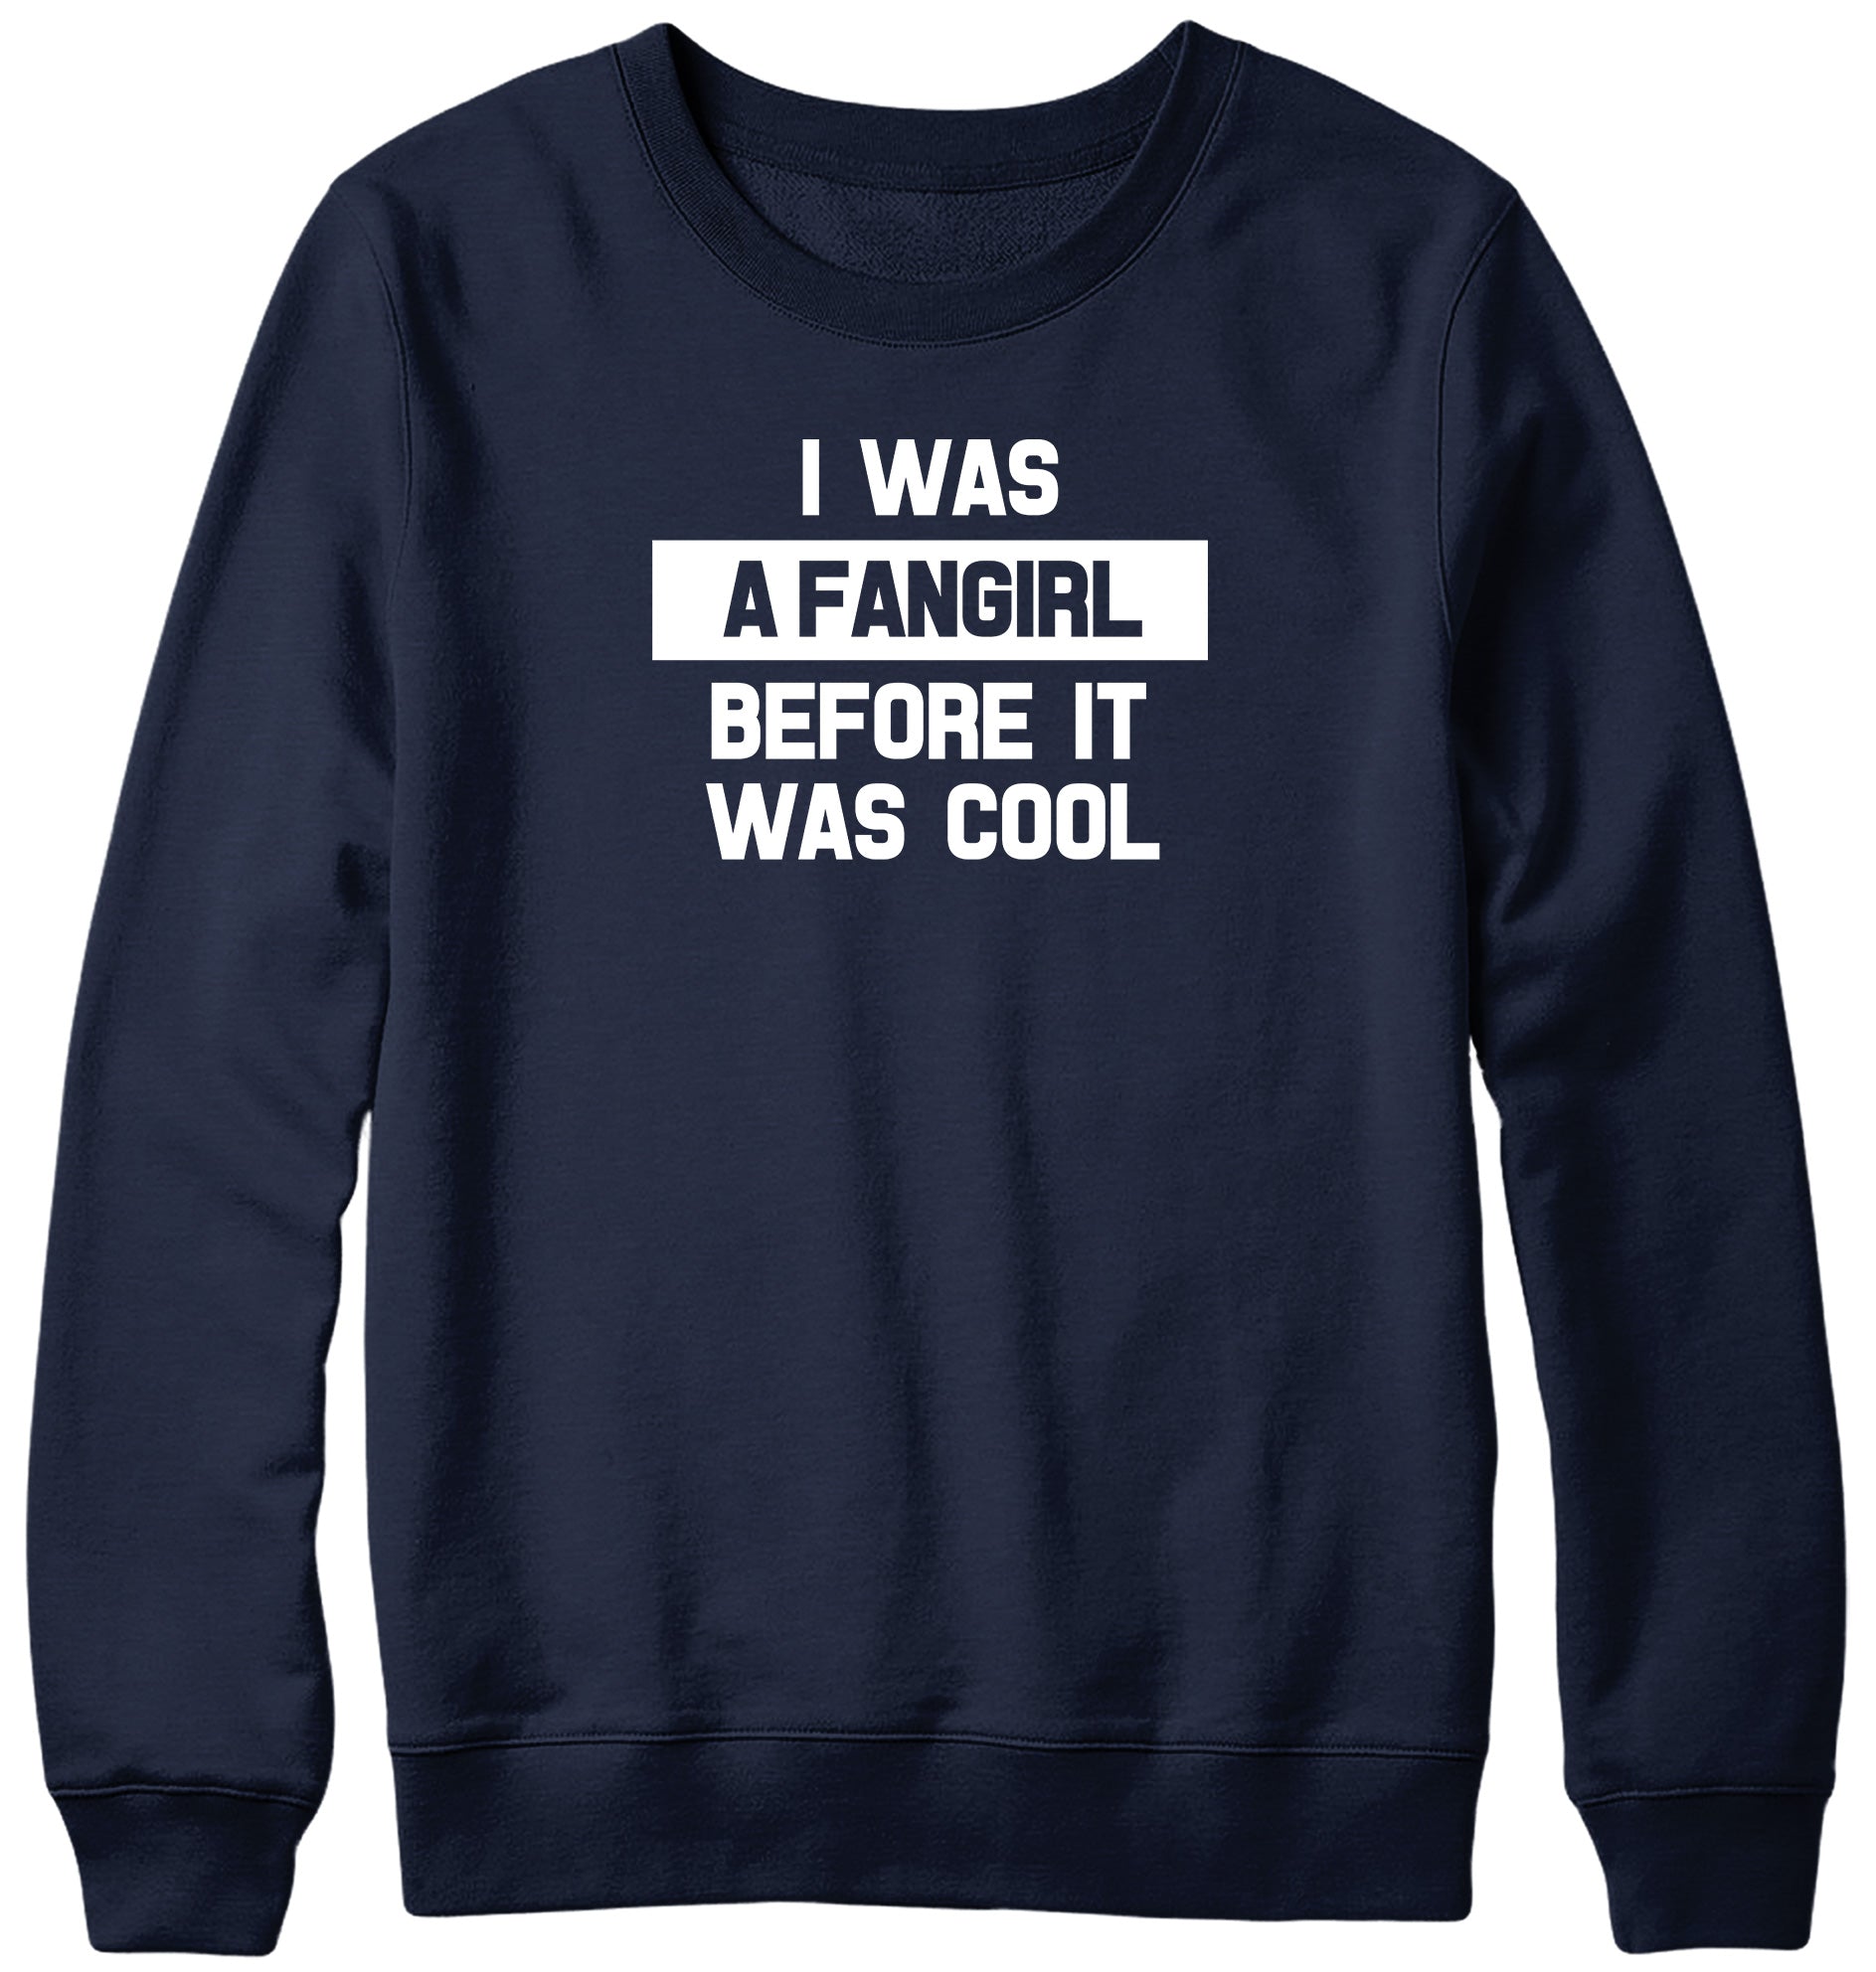 I WAS A FANGIRL BEFORE IT WAS COOL WOMENS LADIES MENS UNISEX SWEATSHIRT